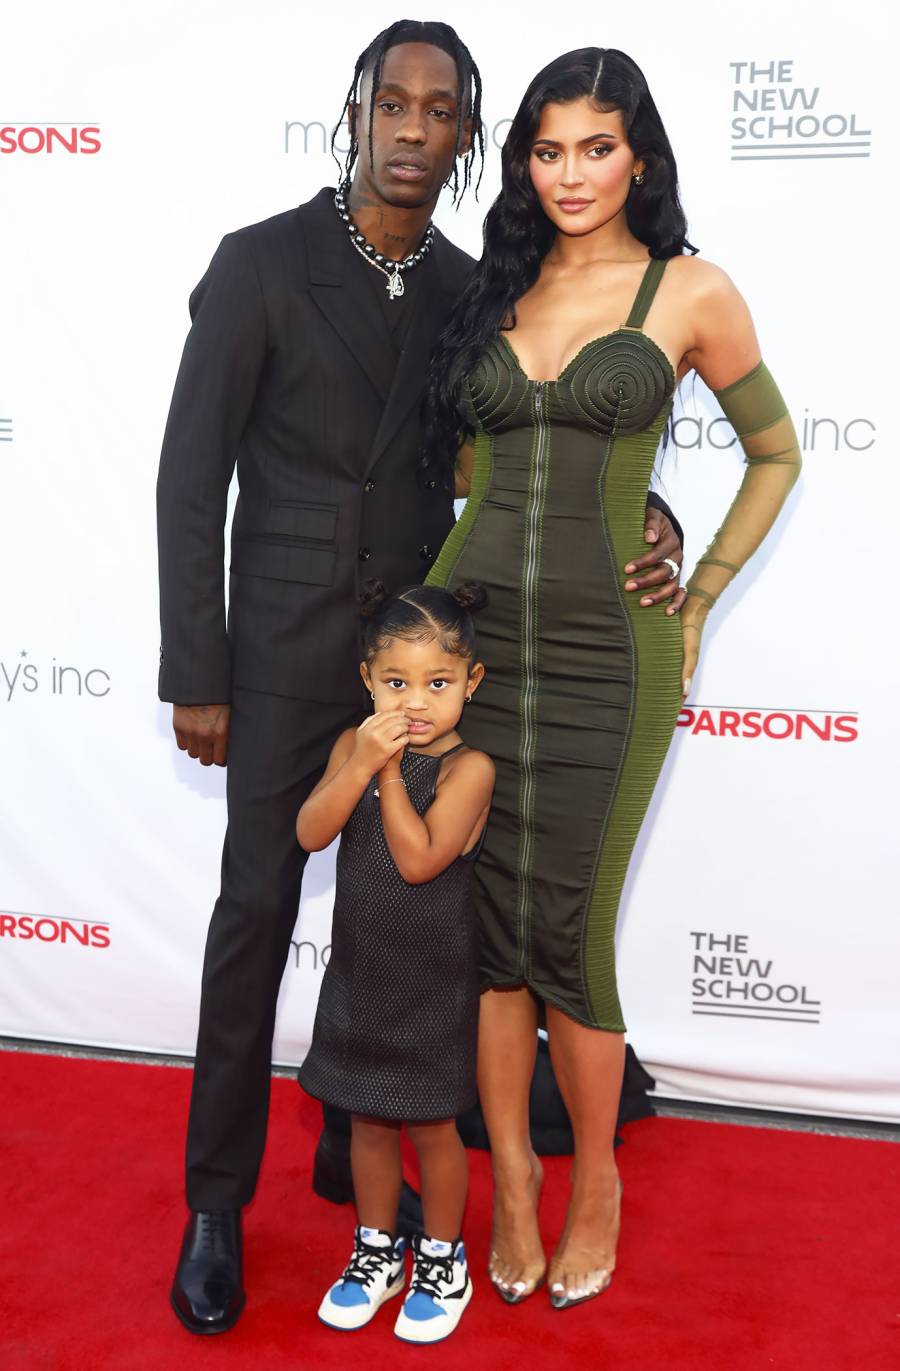 Travis Scott Attends Red Carpet Event With ‘Wifey’ Kylie and Stormi: Pics